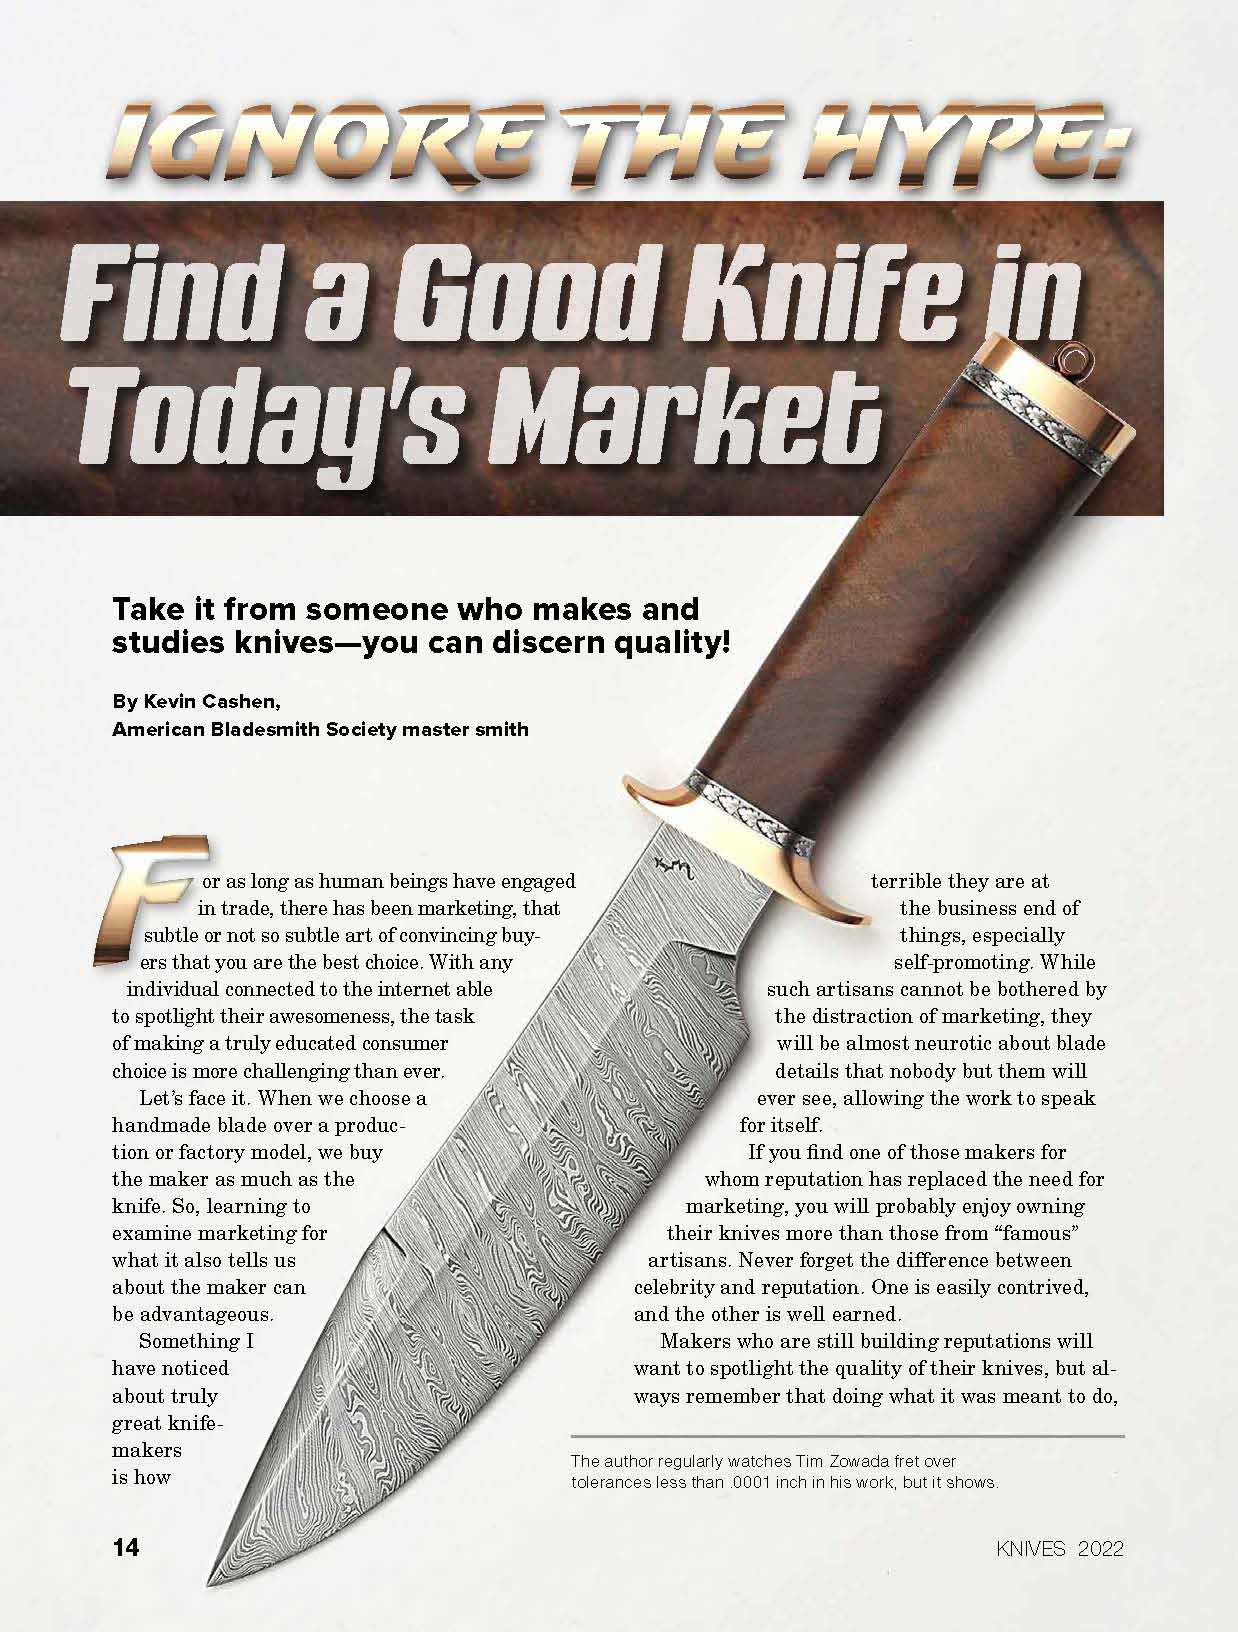 BLADE's Guide to Sharpening Knives – GunDigest Store